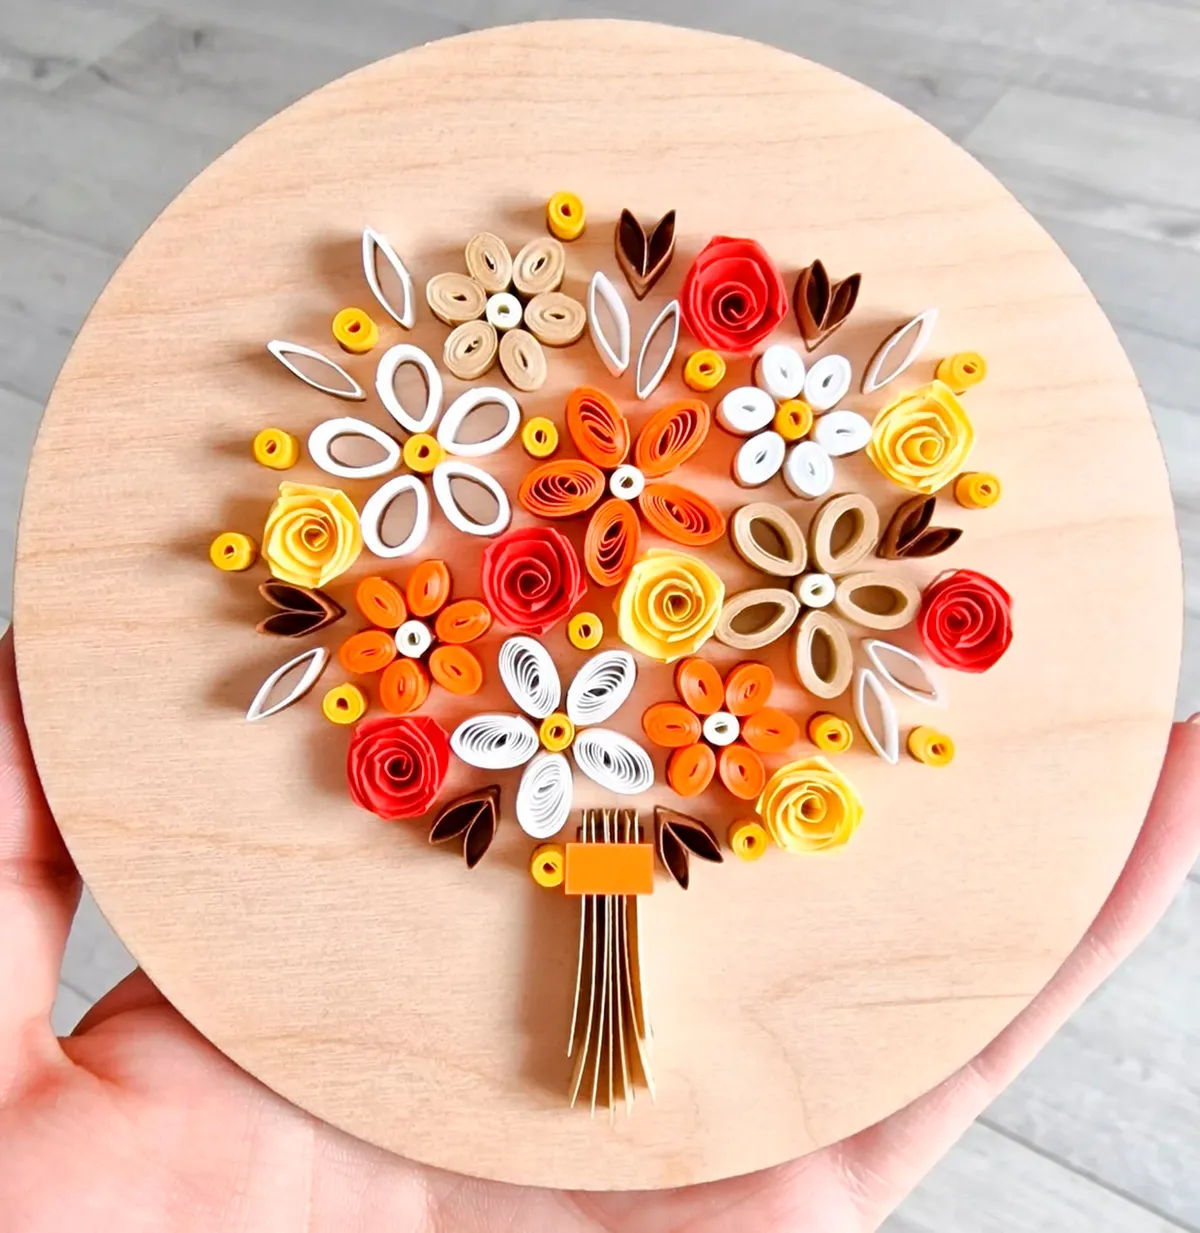 Winter posies quilling kit